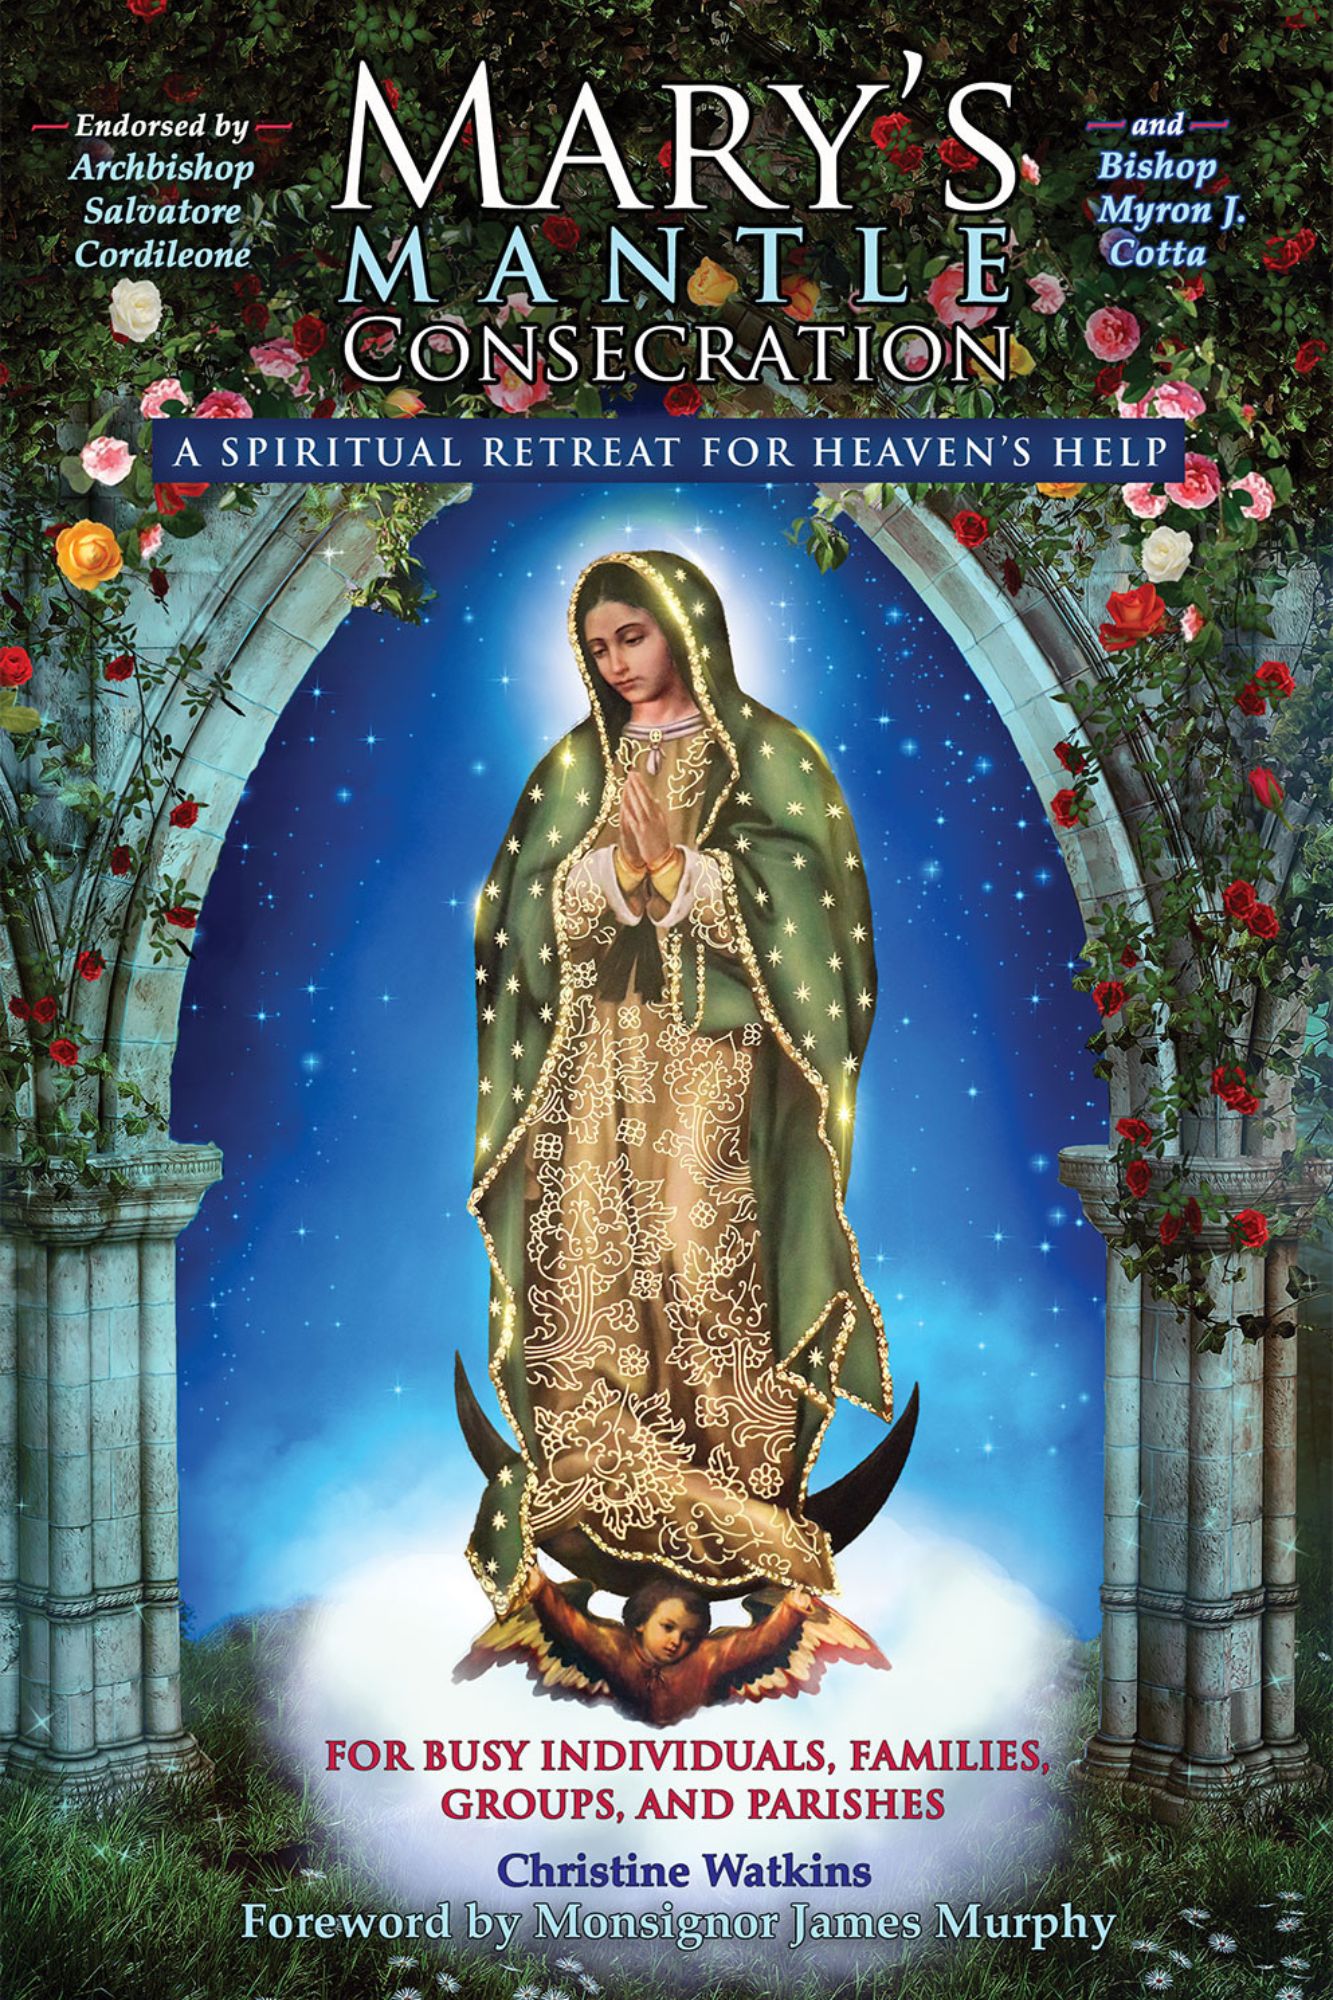 Mary's Mantle - Consecration to Our Lady